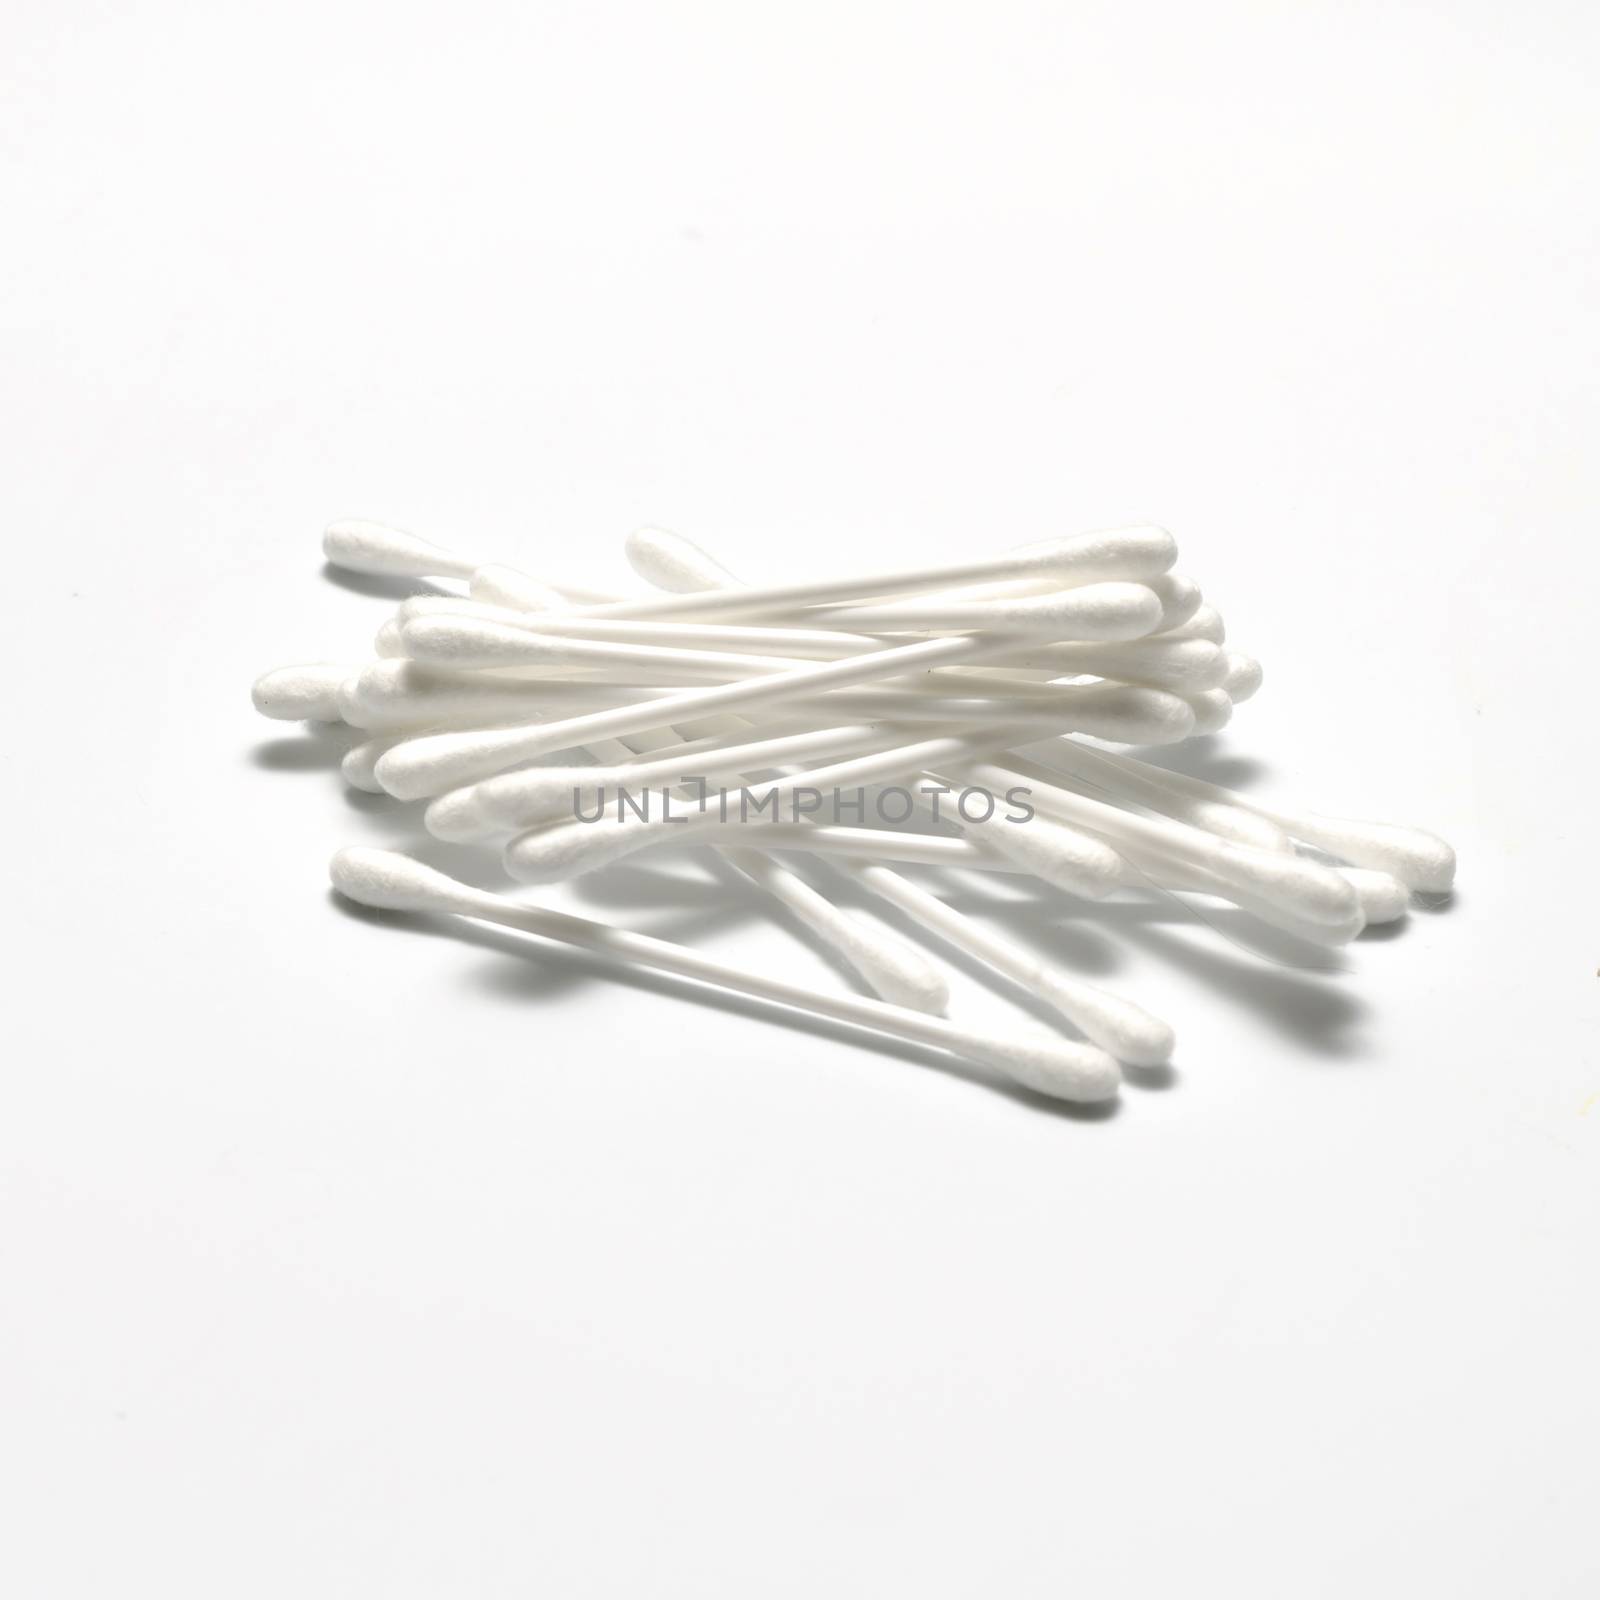 cotton buds on a white bacground